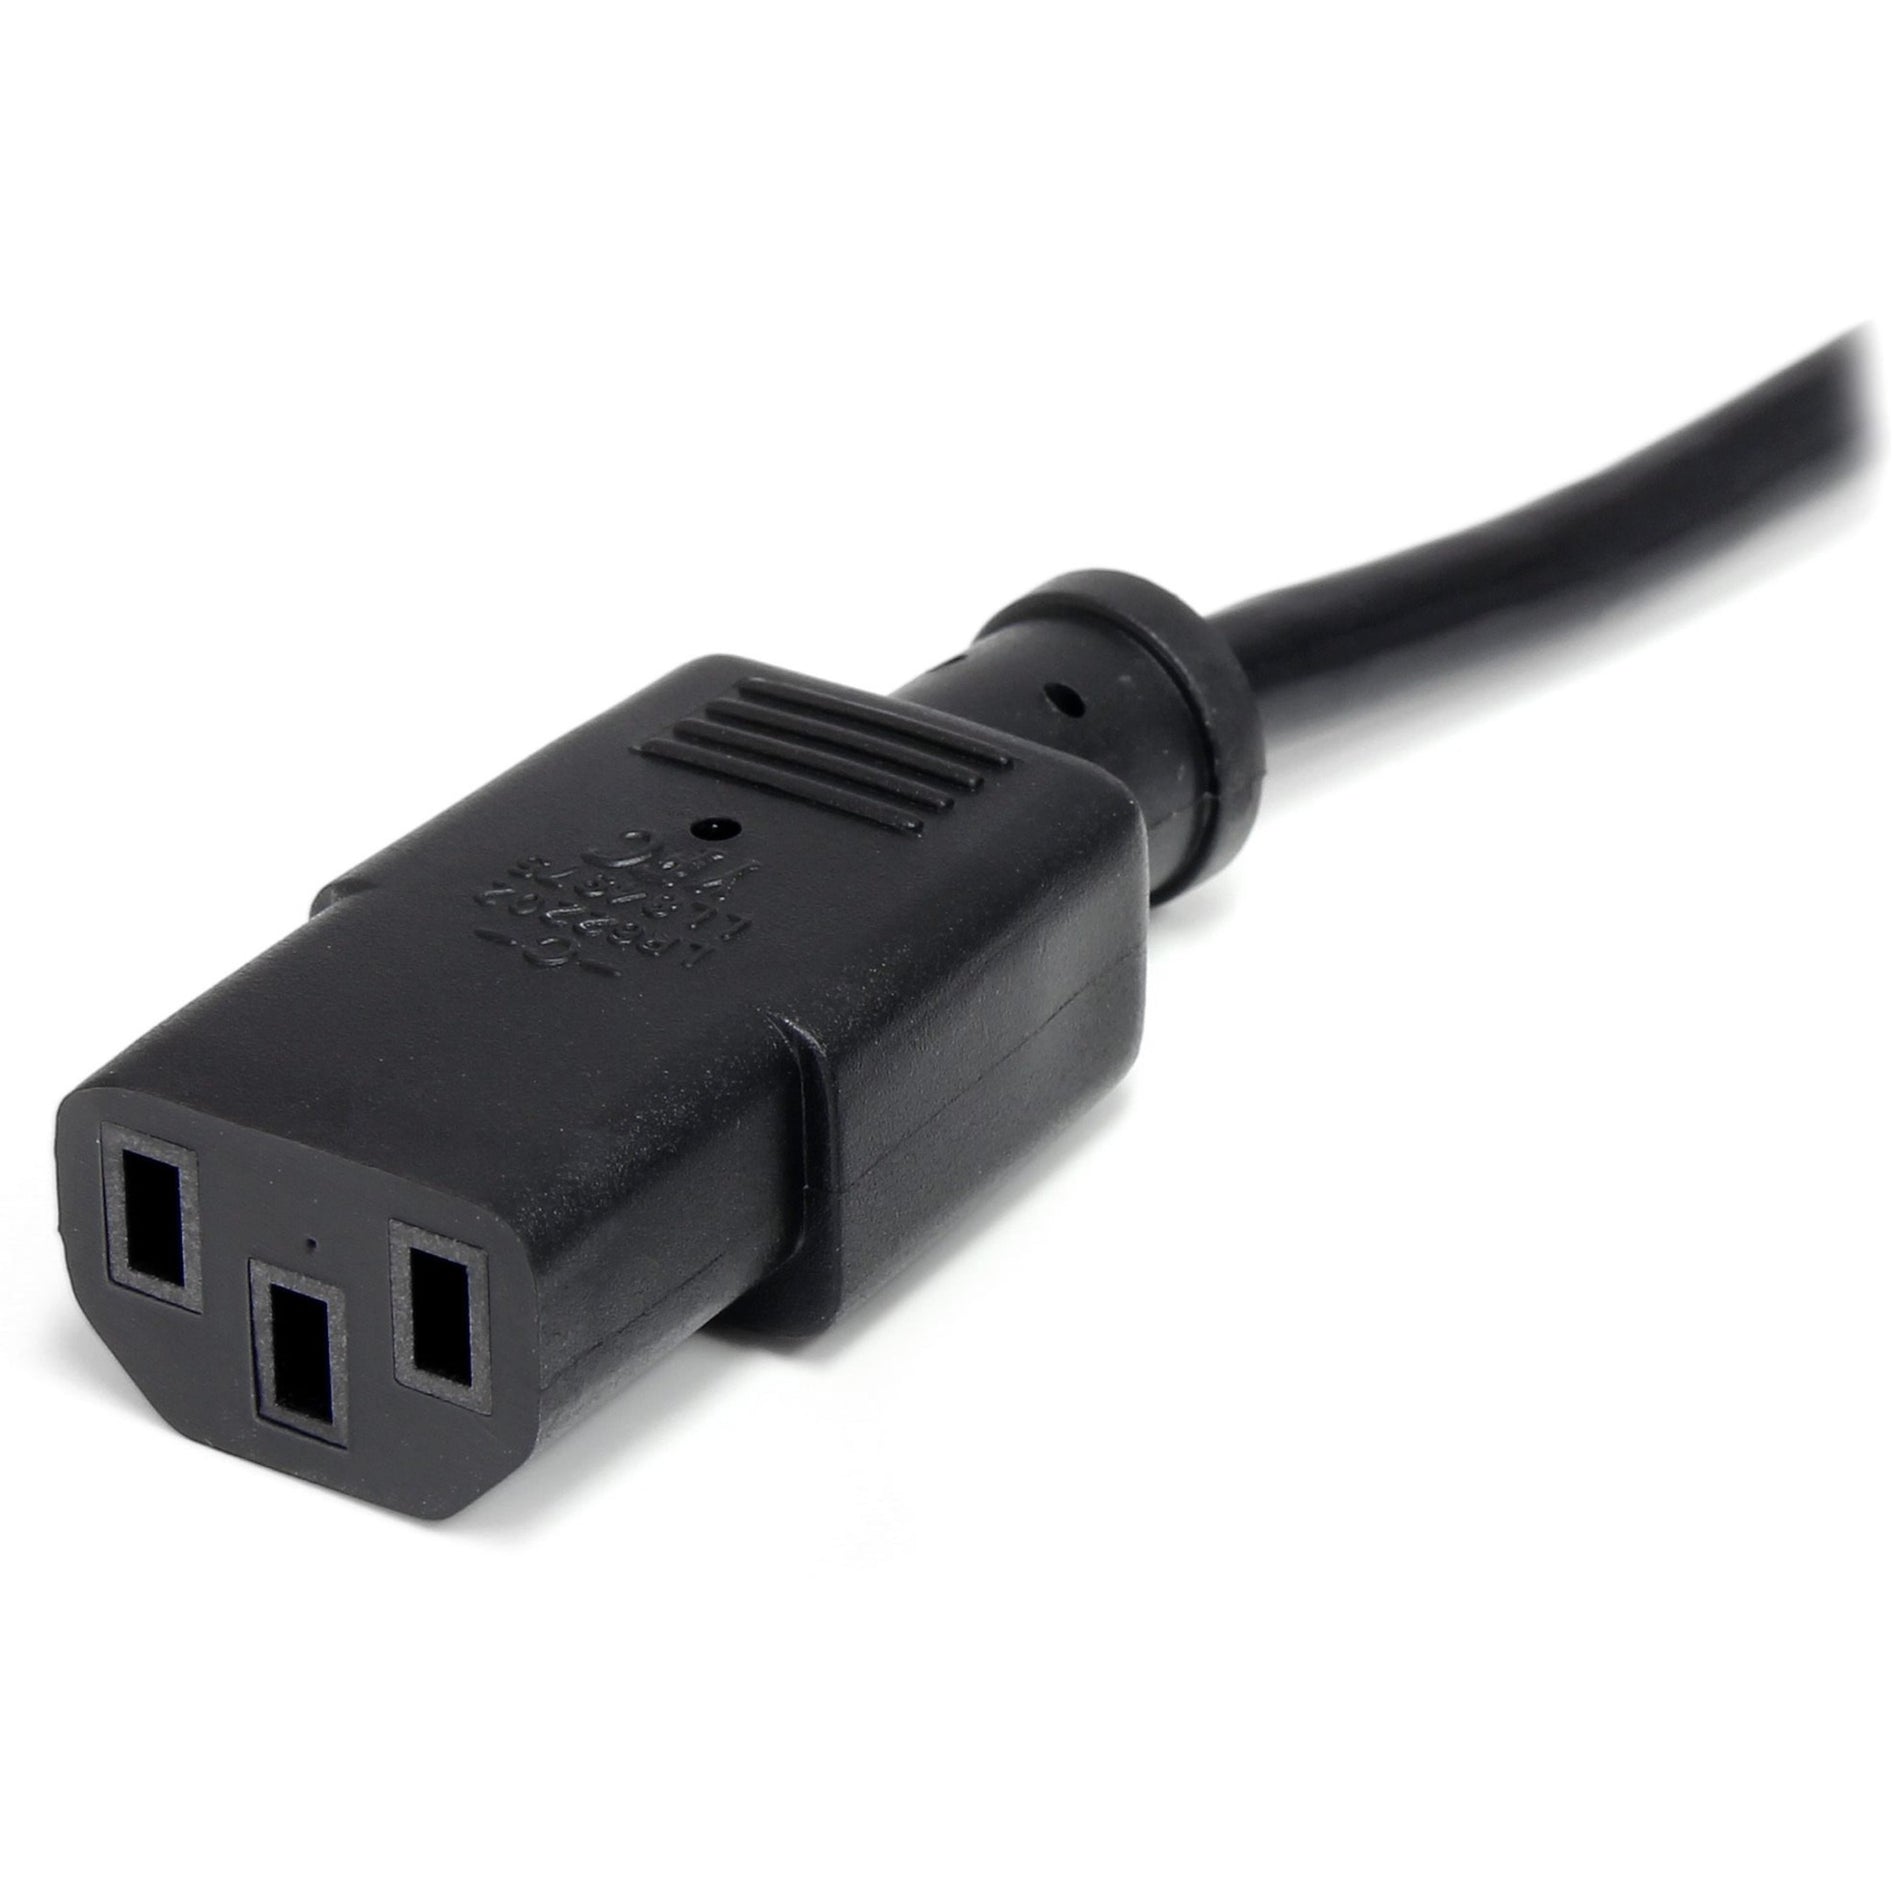 StarTech.com PXT1011 Standard Power Cord, 1ft, Plug Monitor, PC, or Laser Printer into a Grounded Outlet